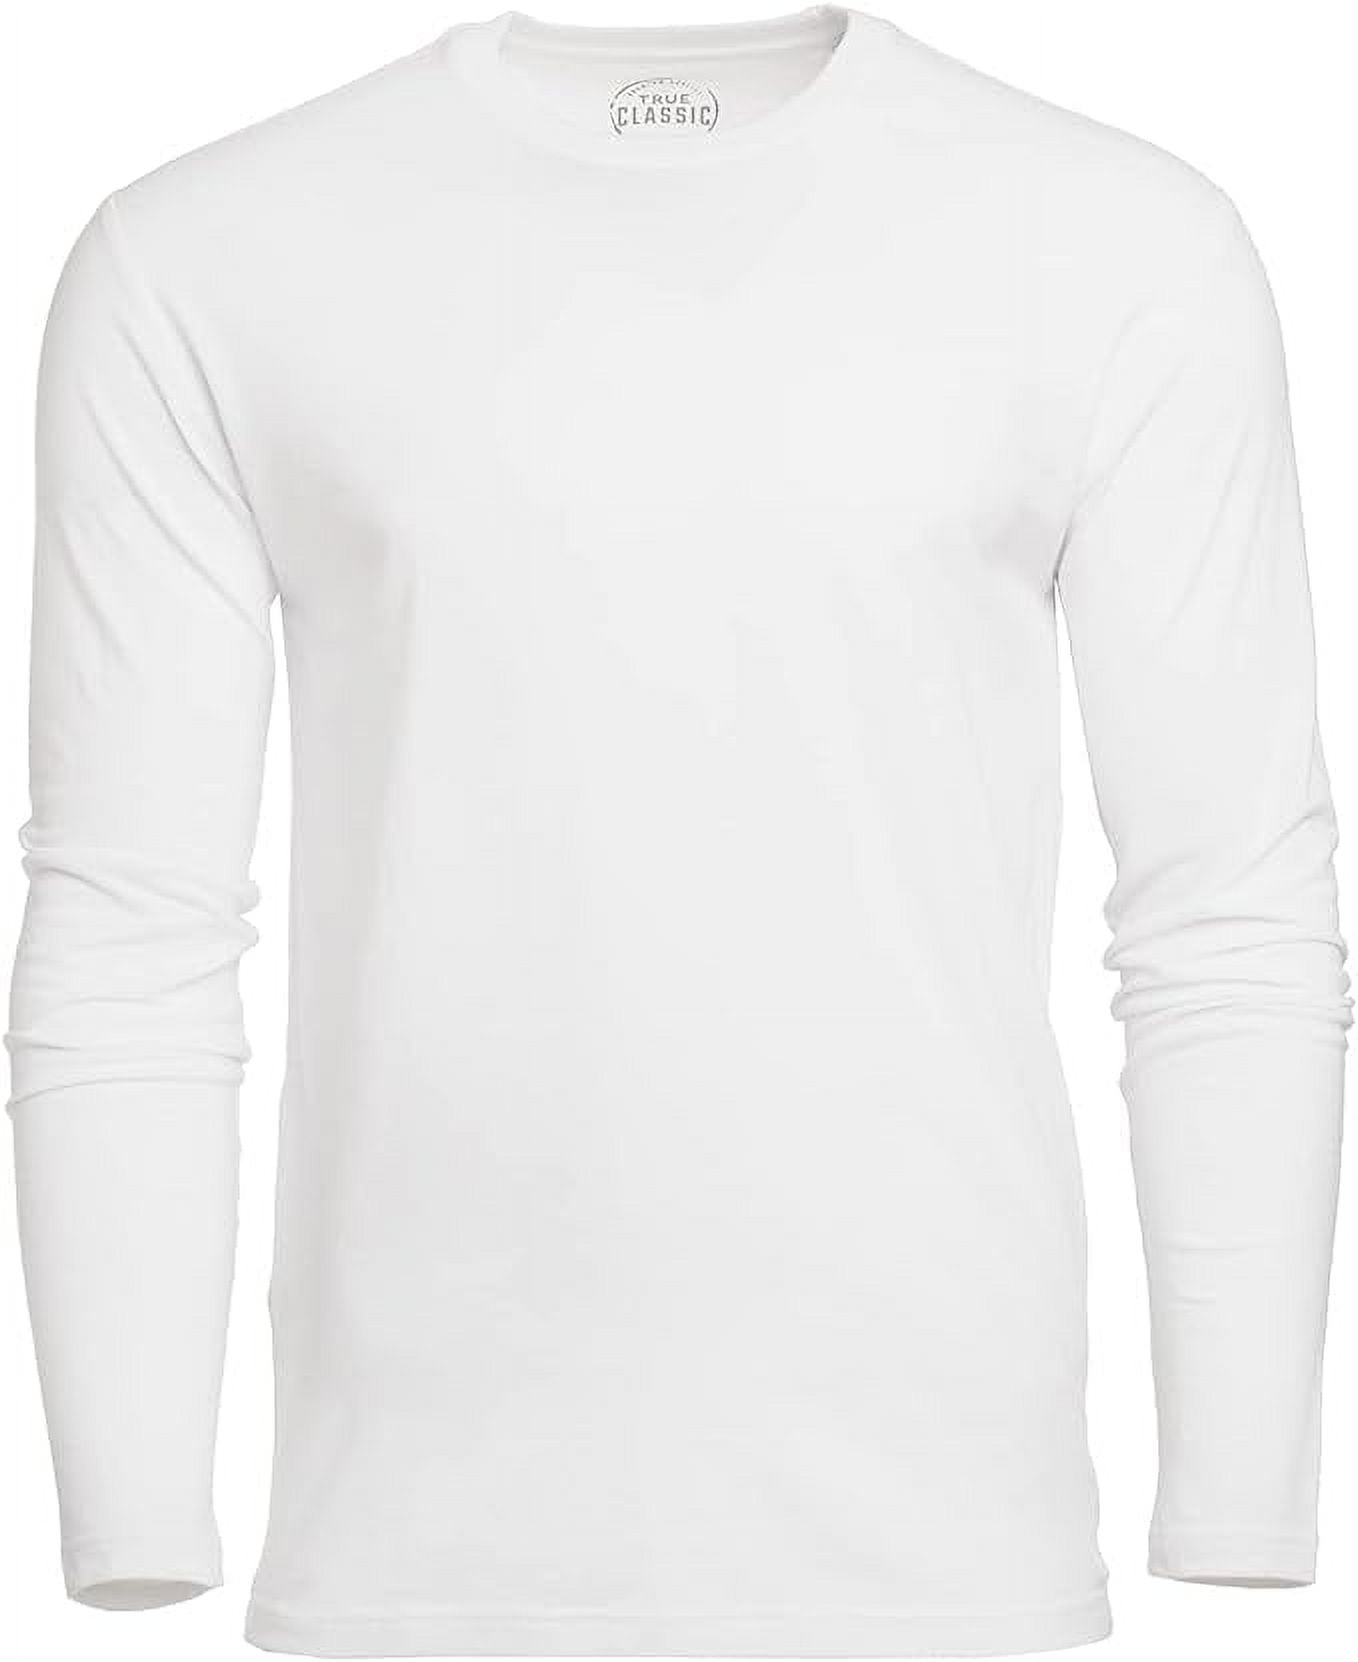 True Classic Long Sleeve Shirts for Men, Premium Fitted Crew Neck T-Shirts  and Gifts for Men. White, Medium